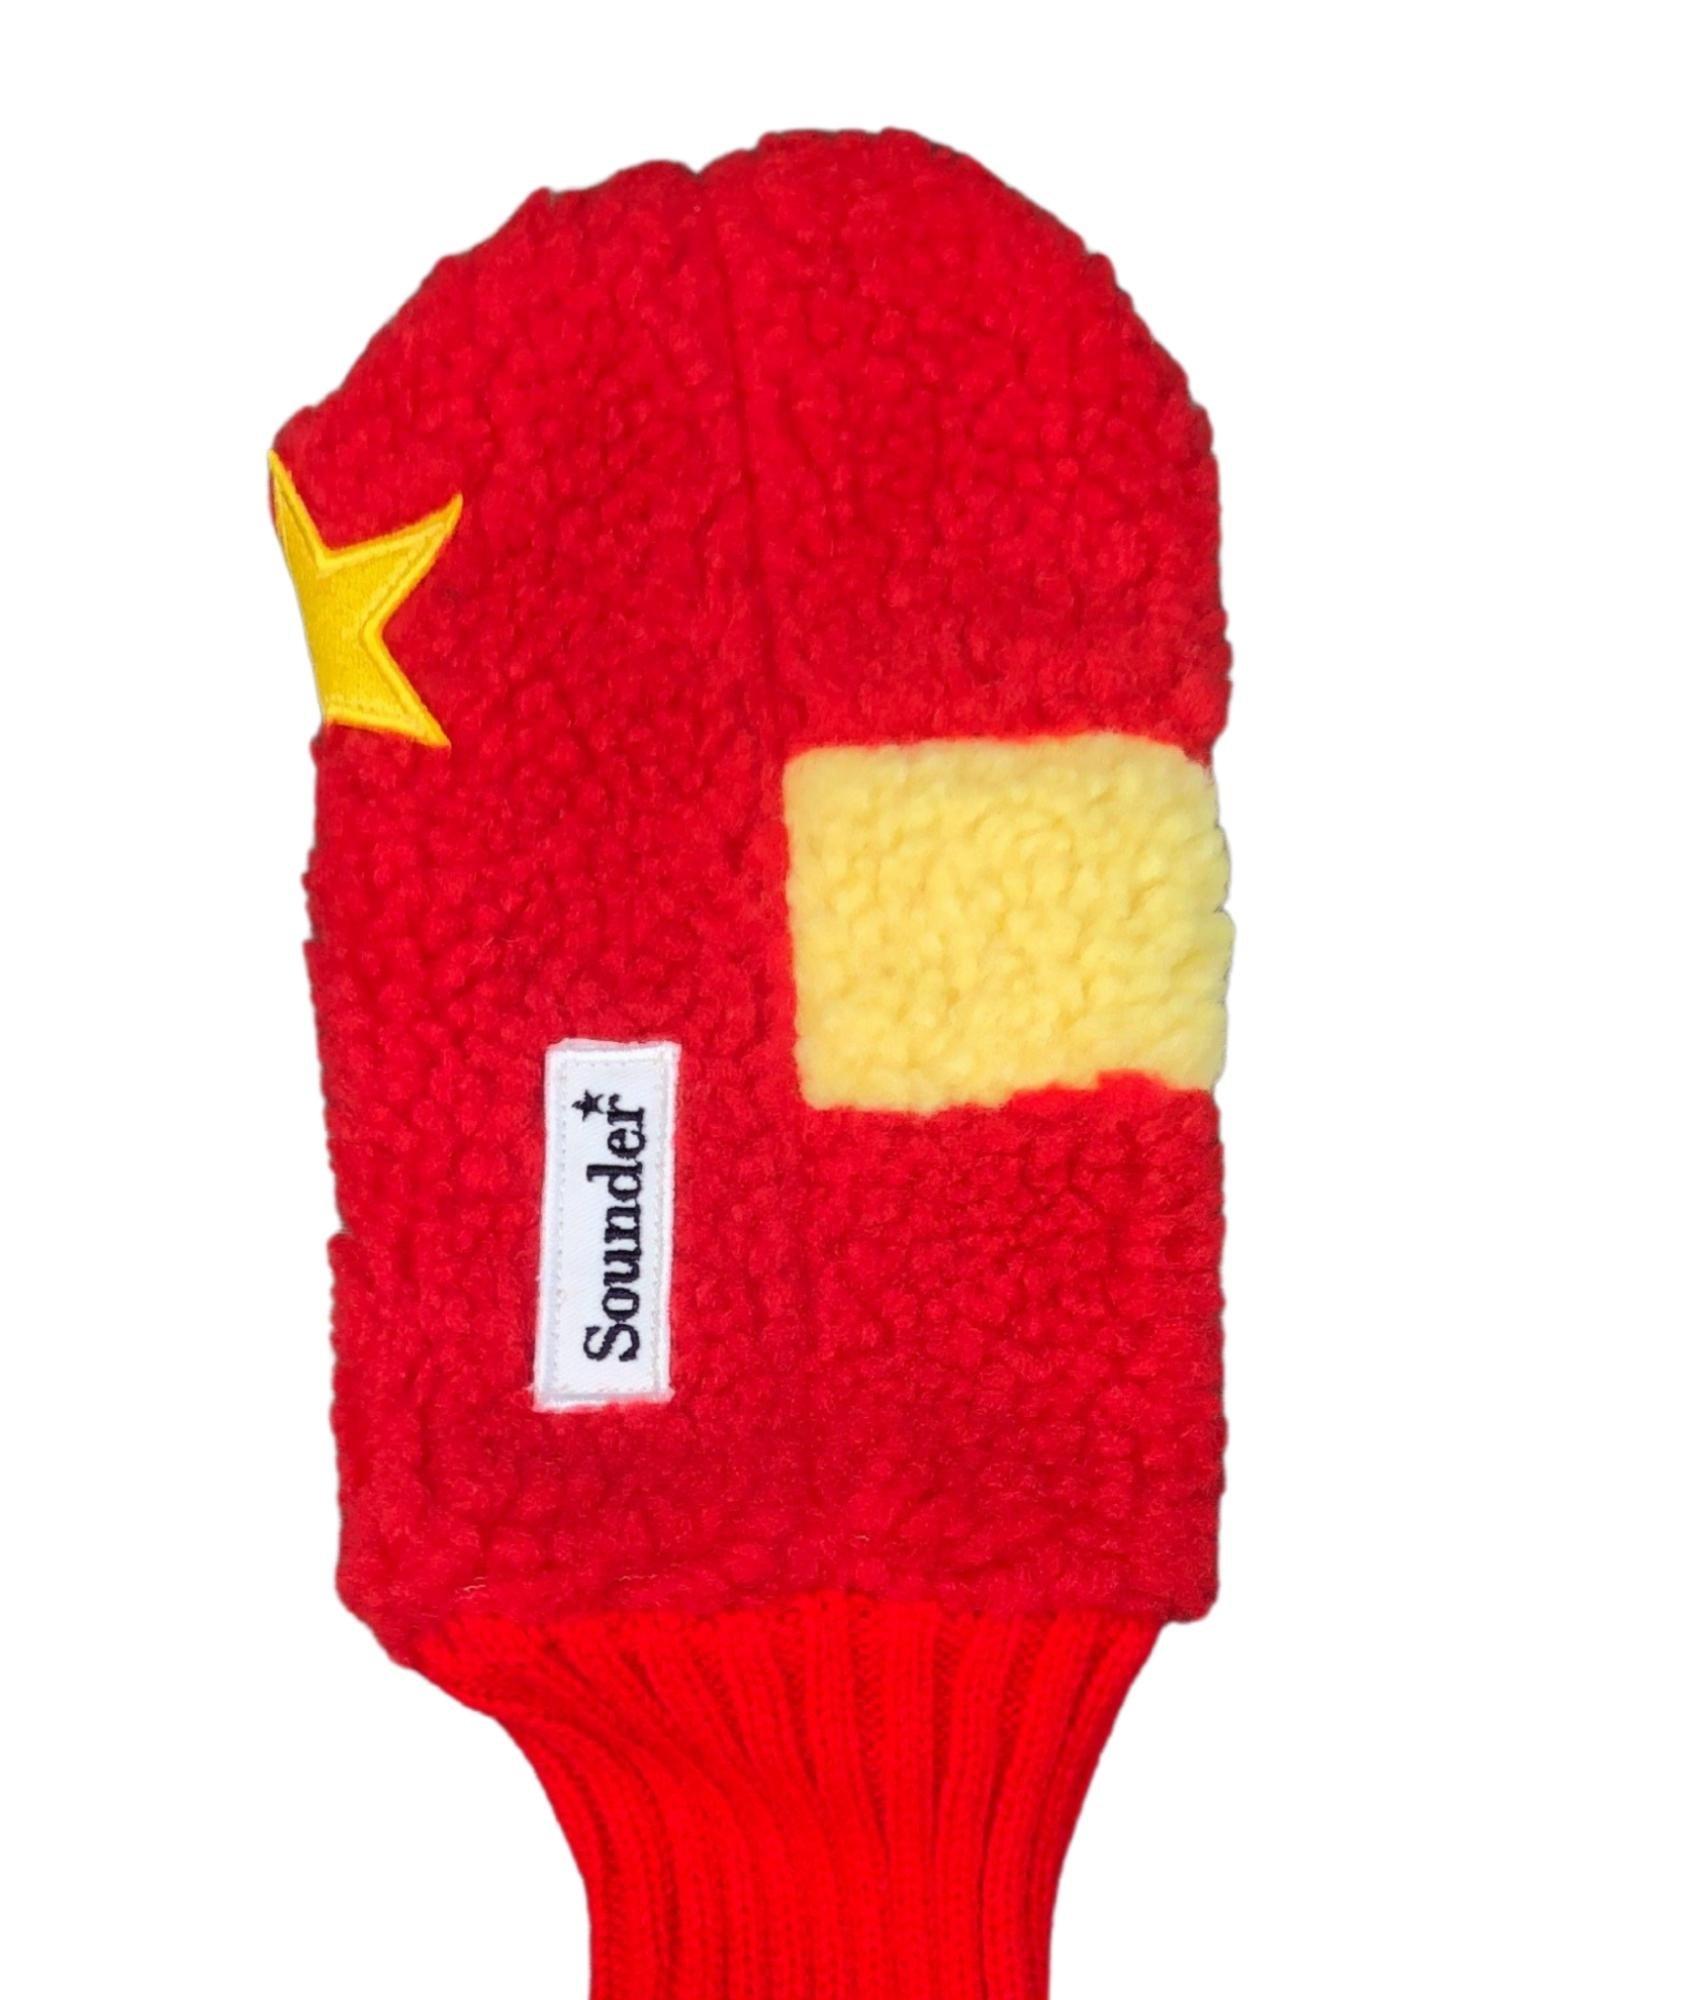 Driver Headcover image 1